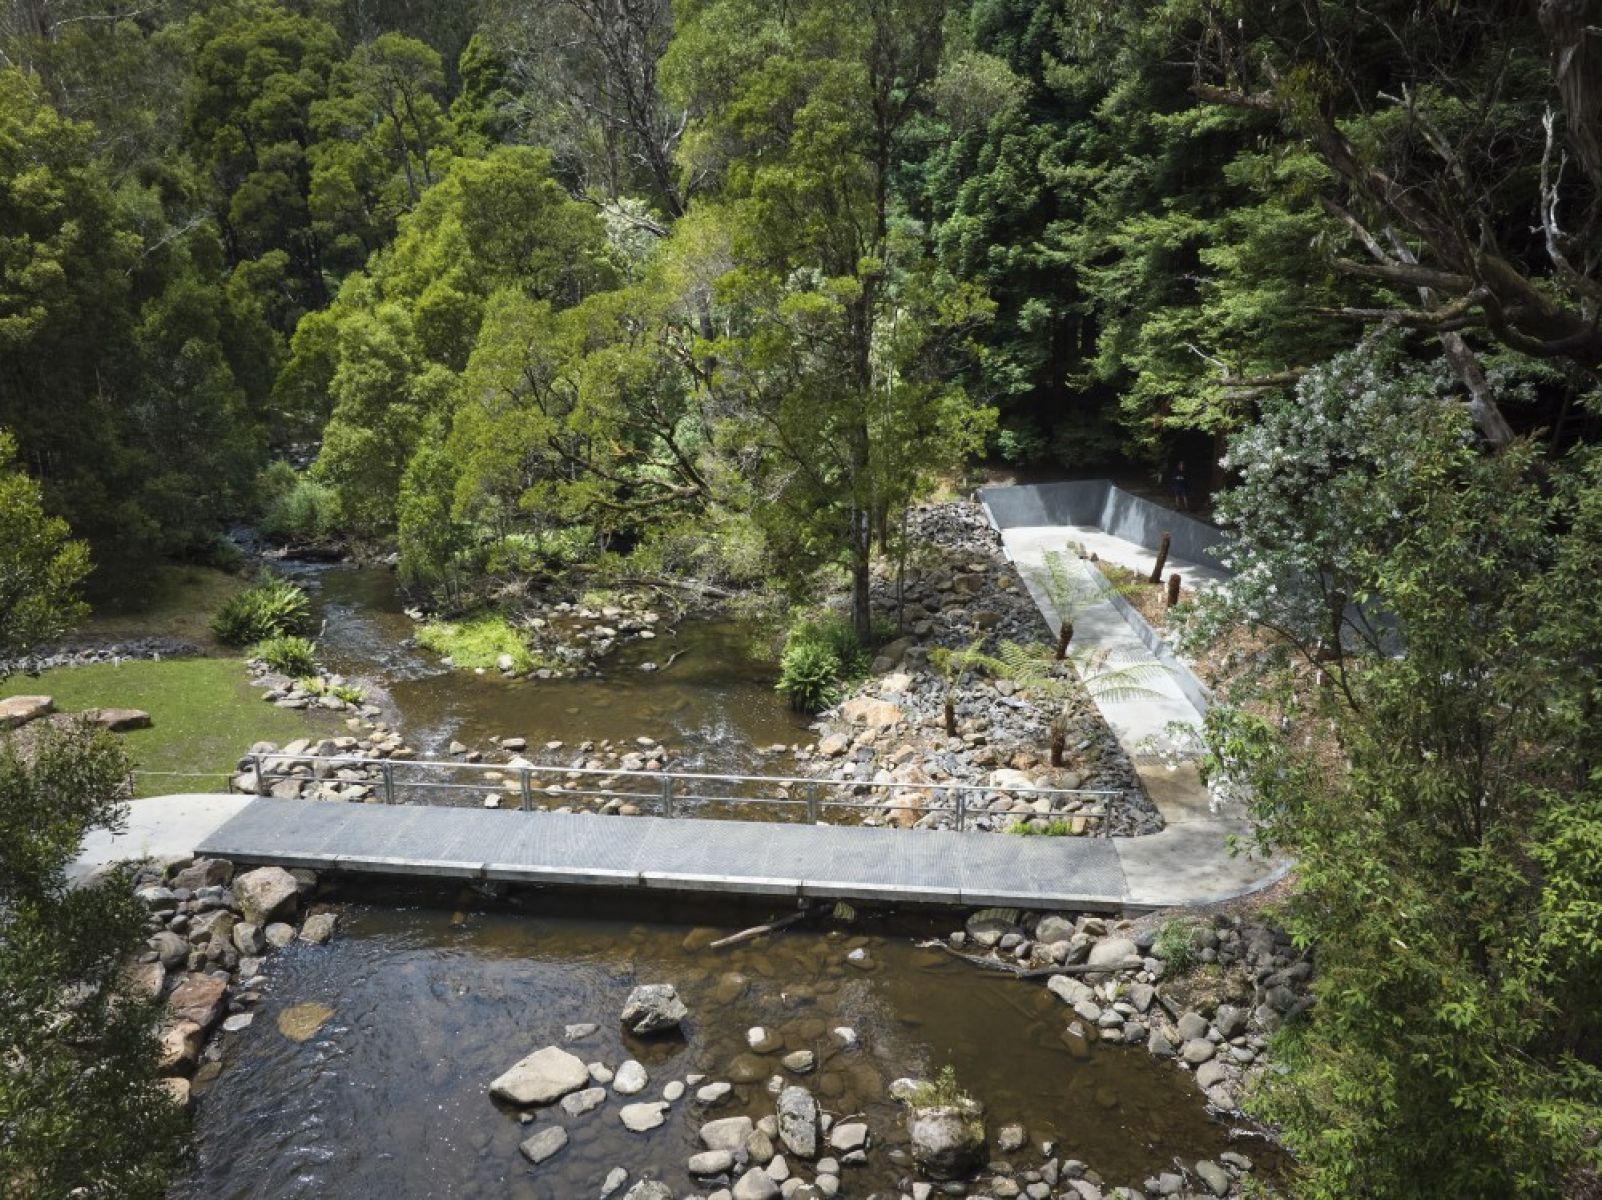 A concrete and metal walkway goes over a small rocky river. A variety of green trees surround the area.